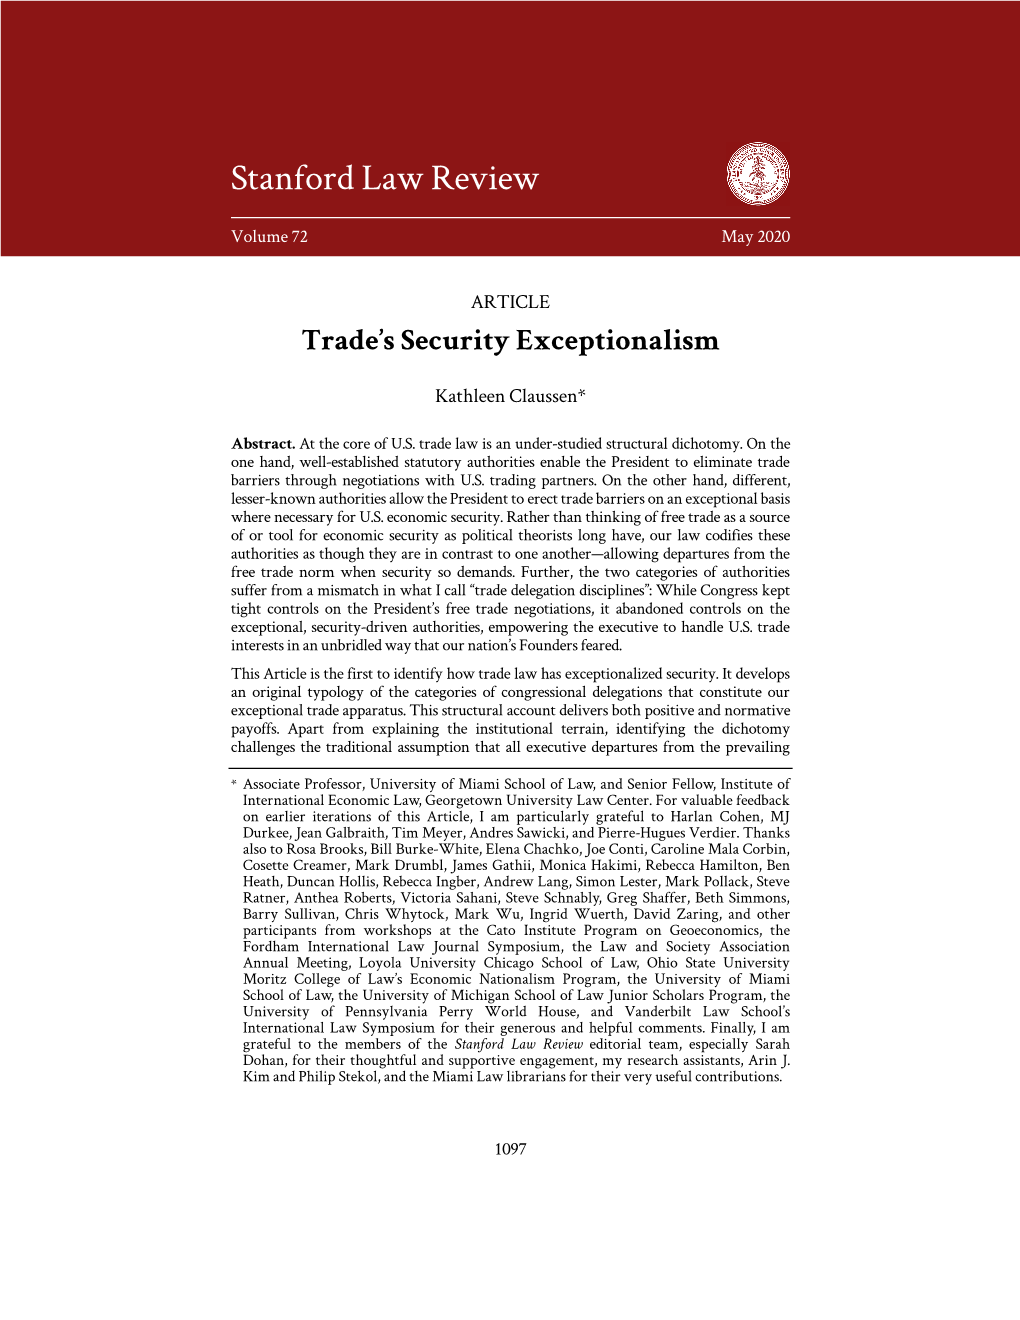 Trade's Security Exceptionalism